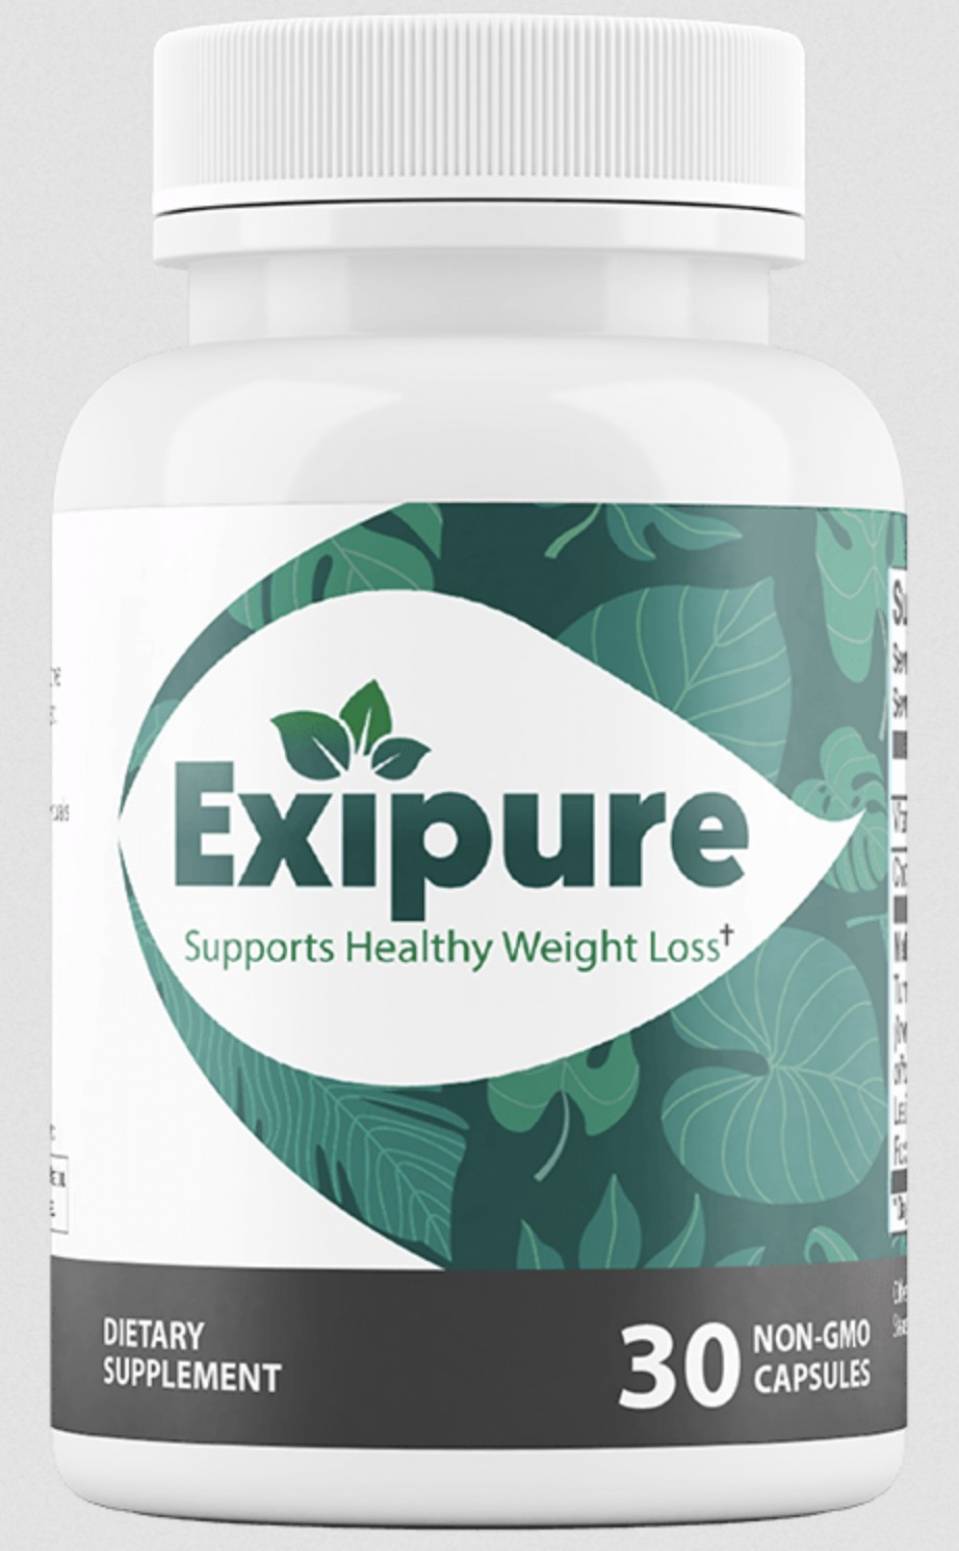 Does Exipure Work For Weight Loss